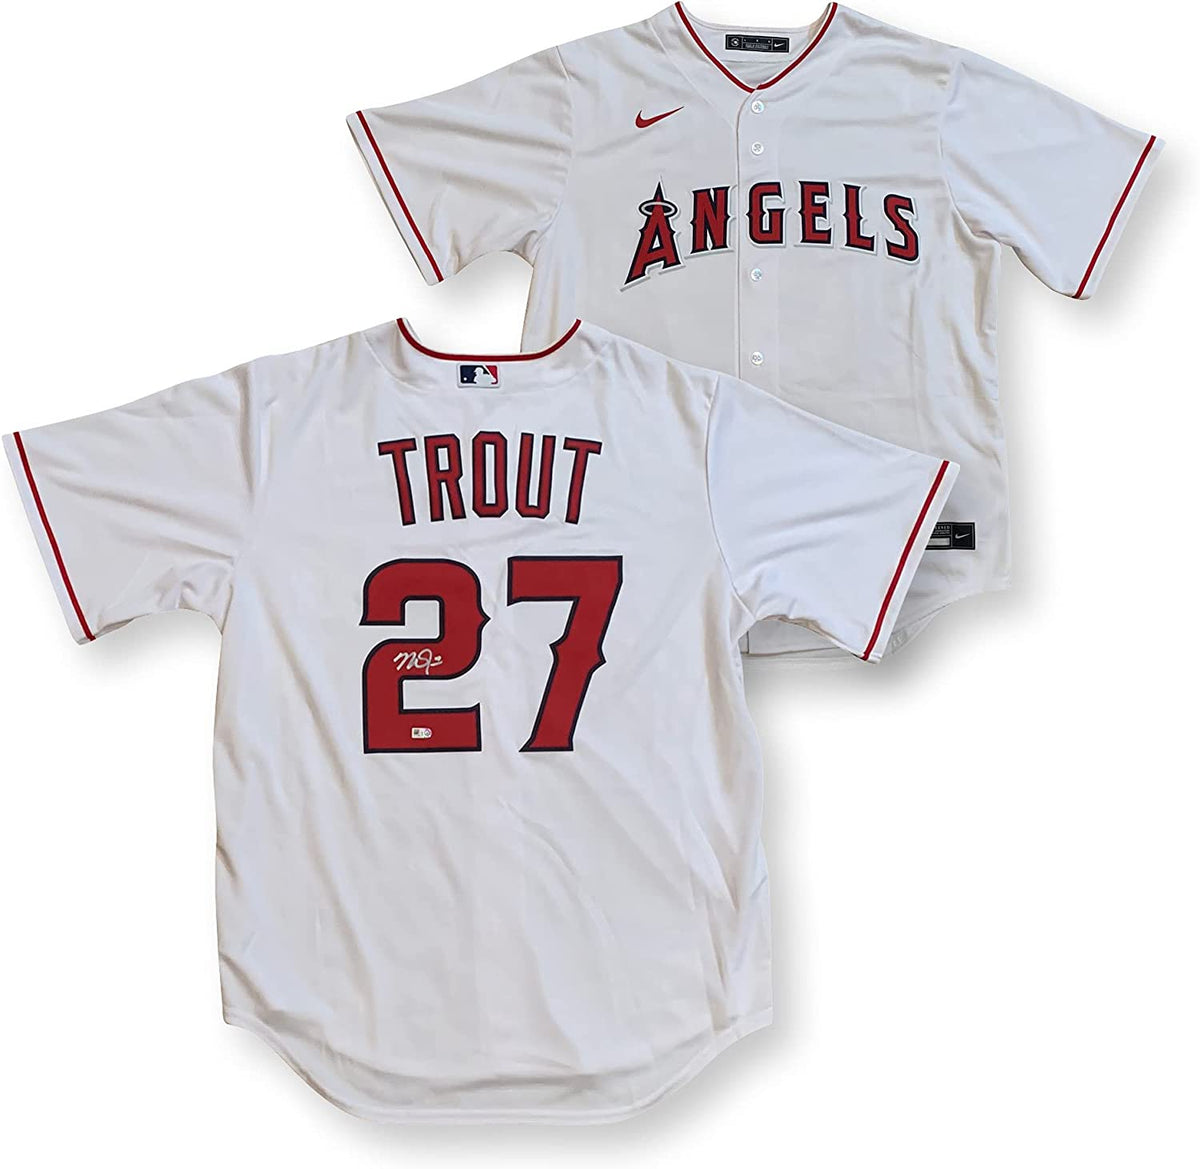 Mike Trout Los Angeles Angels Autographed White Nike Authentic Jersey with  14 16 19 AL MVP Inscription